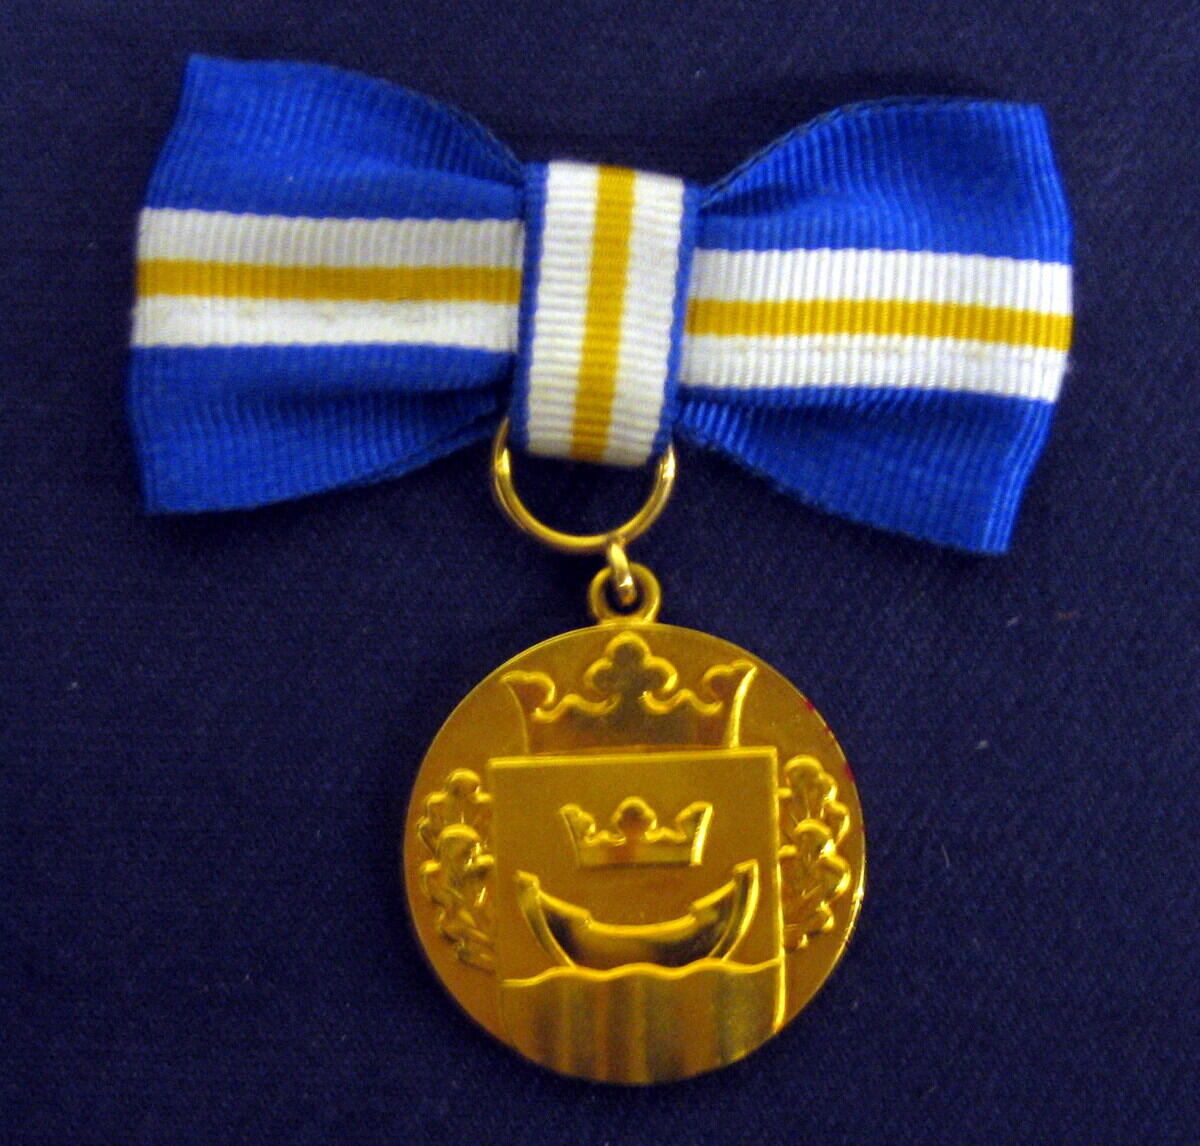 Helsinki Day also includes the Helsinki Medal award ceremony. The medal in the picture is from 1956, when the medals were awarded for the first time to person that had served the city for 30 years. Photo: Helsinki City Museum